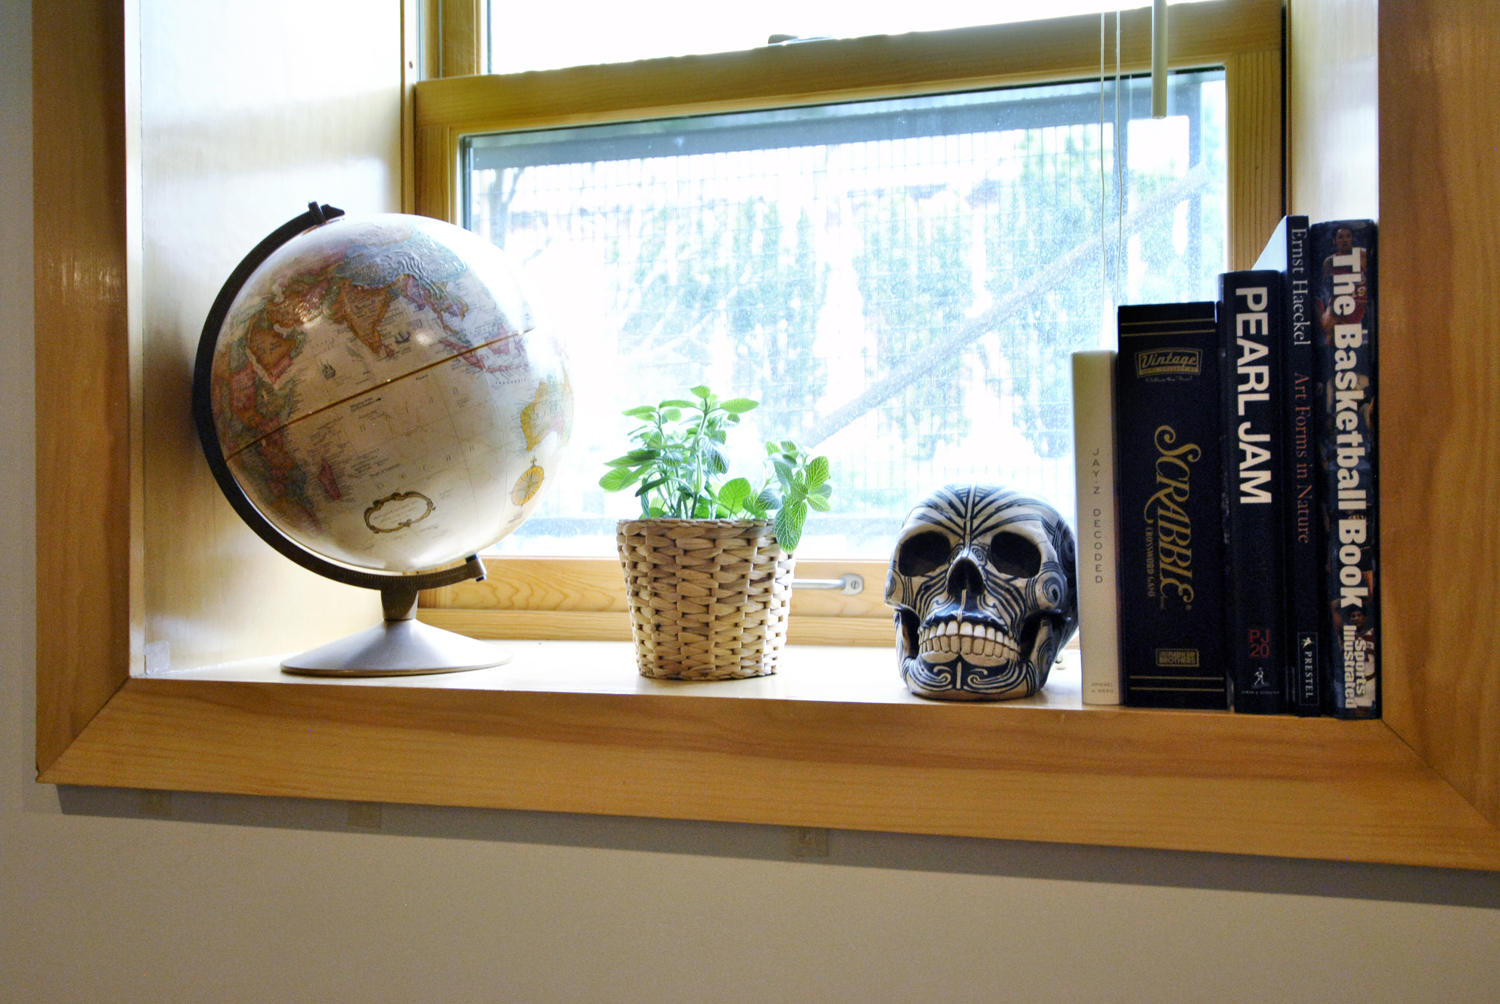 A basement apartment window ledge with potted plant, books and a globe